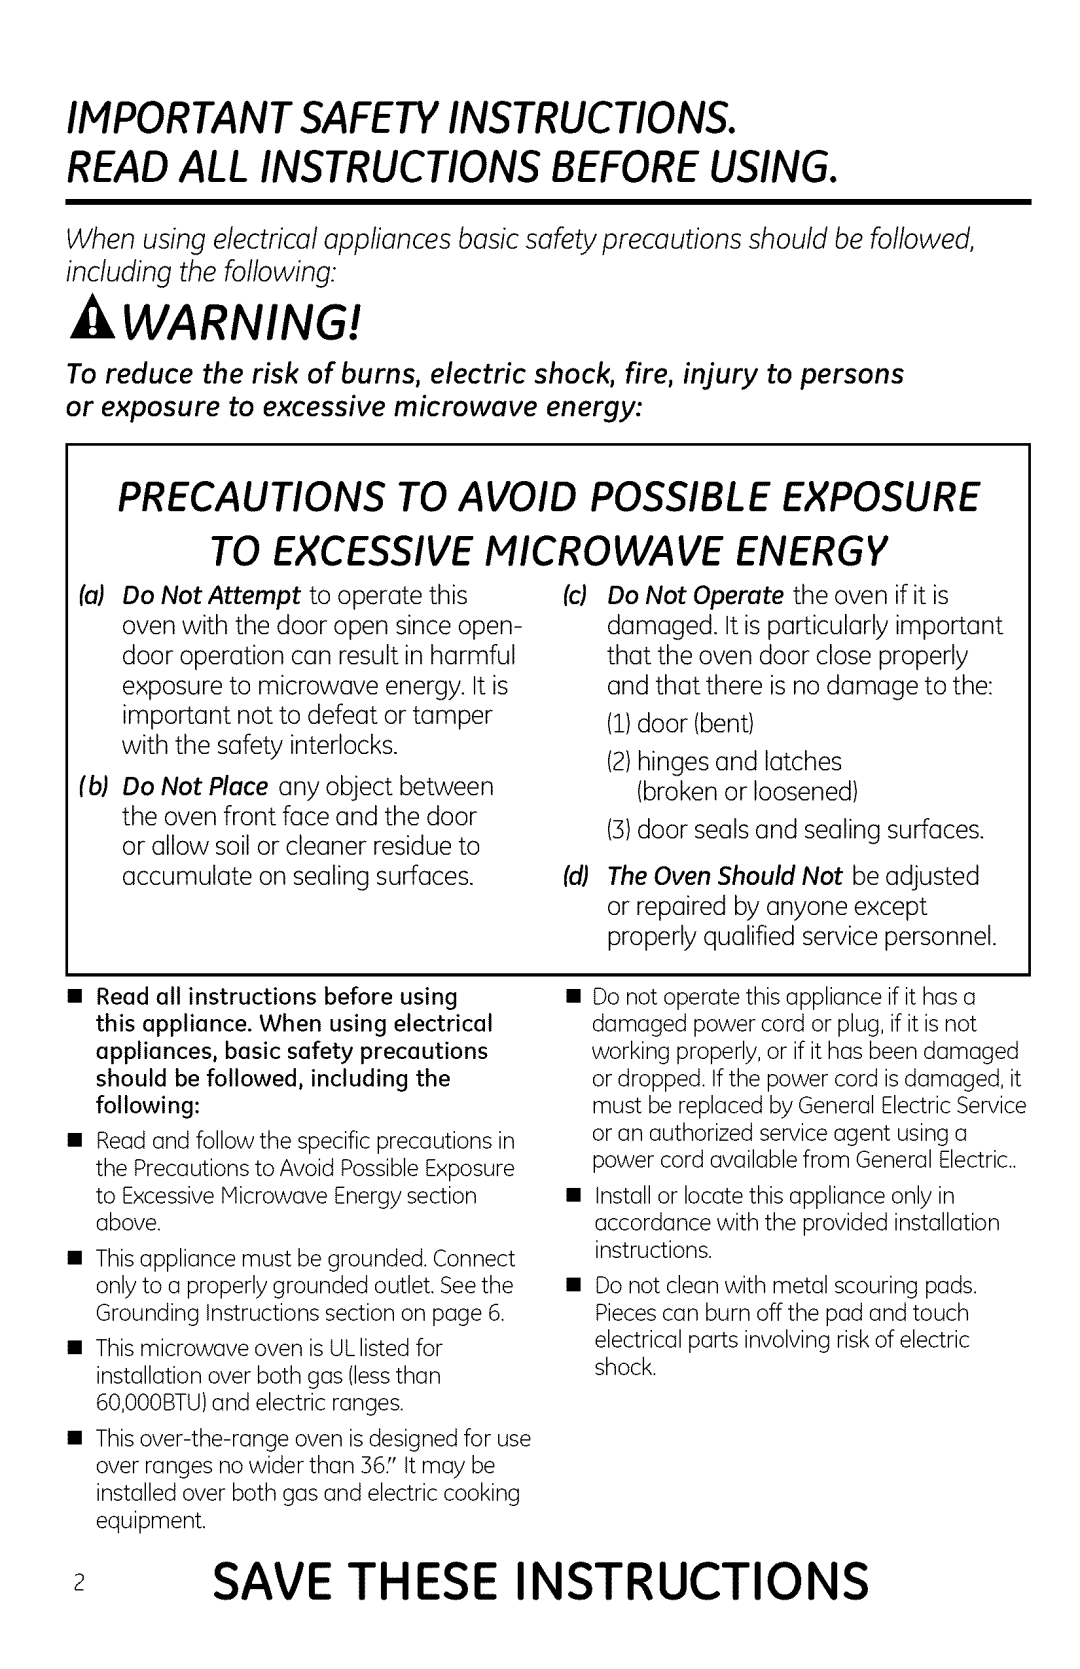 GE JNM1951, DVM1950, JVM1950 Save These Instructions, Precautions To Avoid Possible Exposure, To Excessive Microwave Energy 